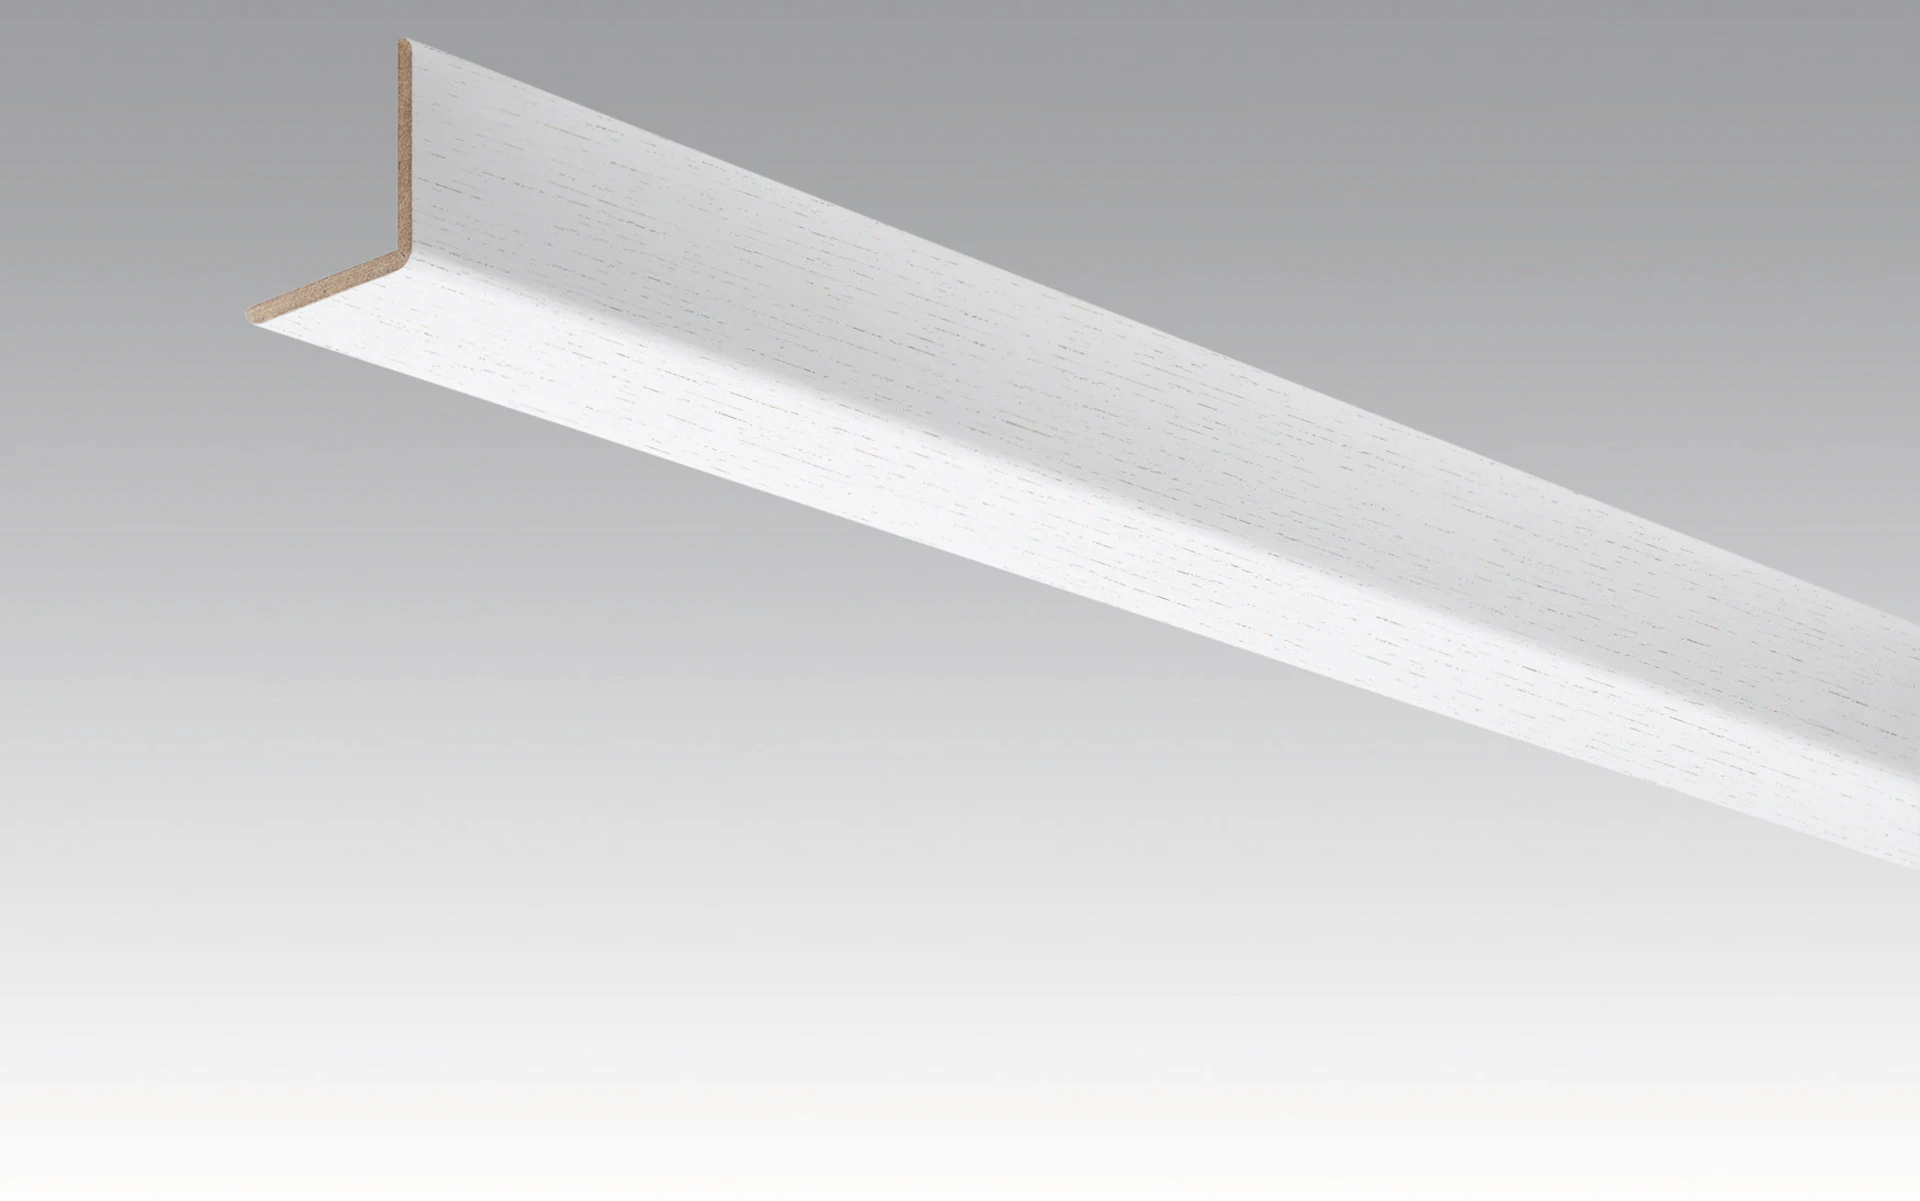 MEISTER Skirting boards Angle skirting Fineline white 4017 - 2380 x 33 x 3.5 mm (200035-2380-04017)